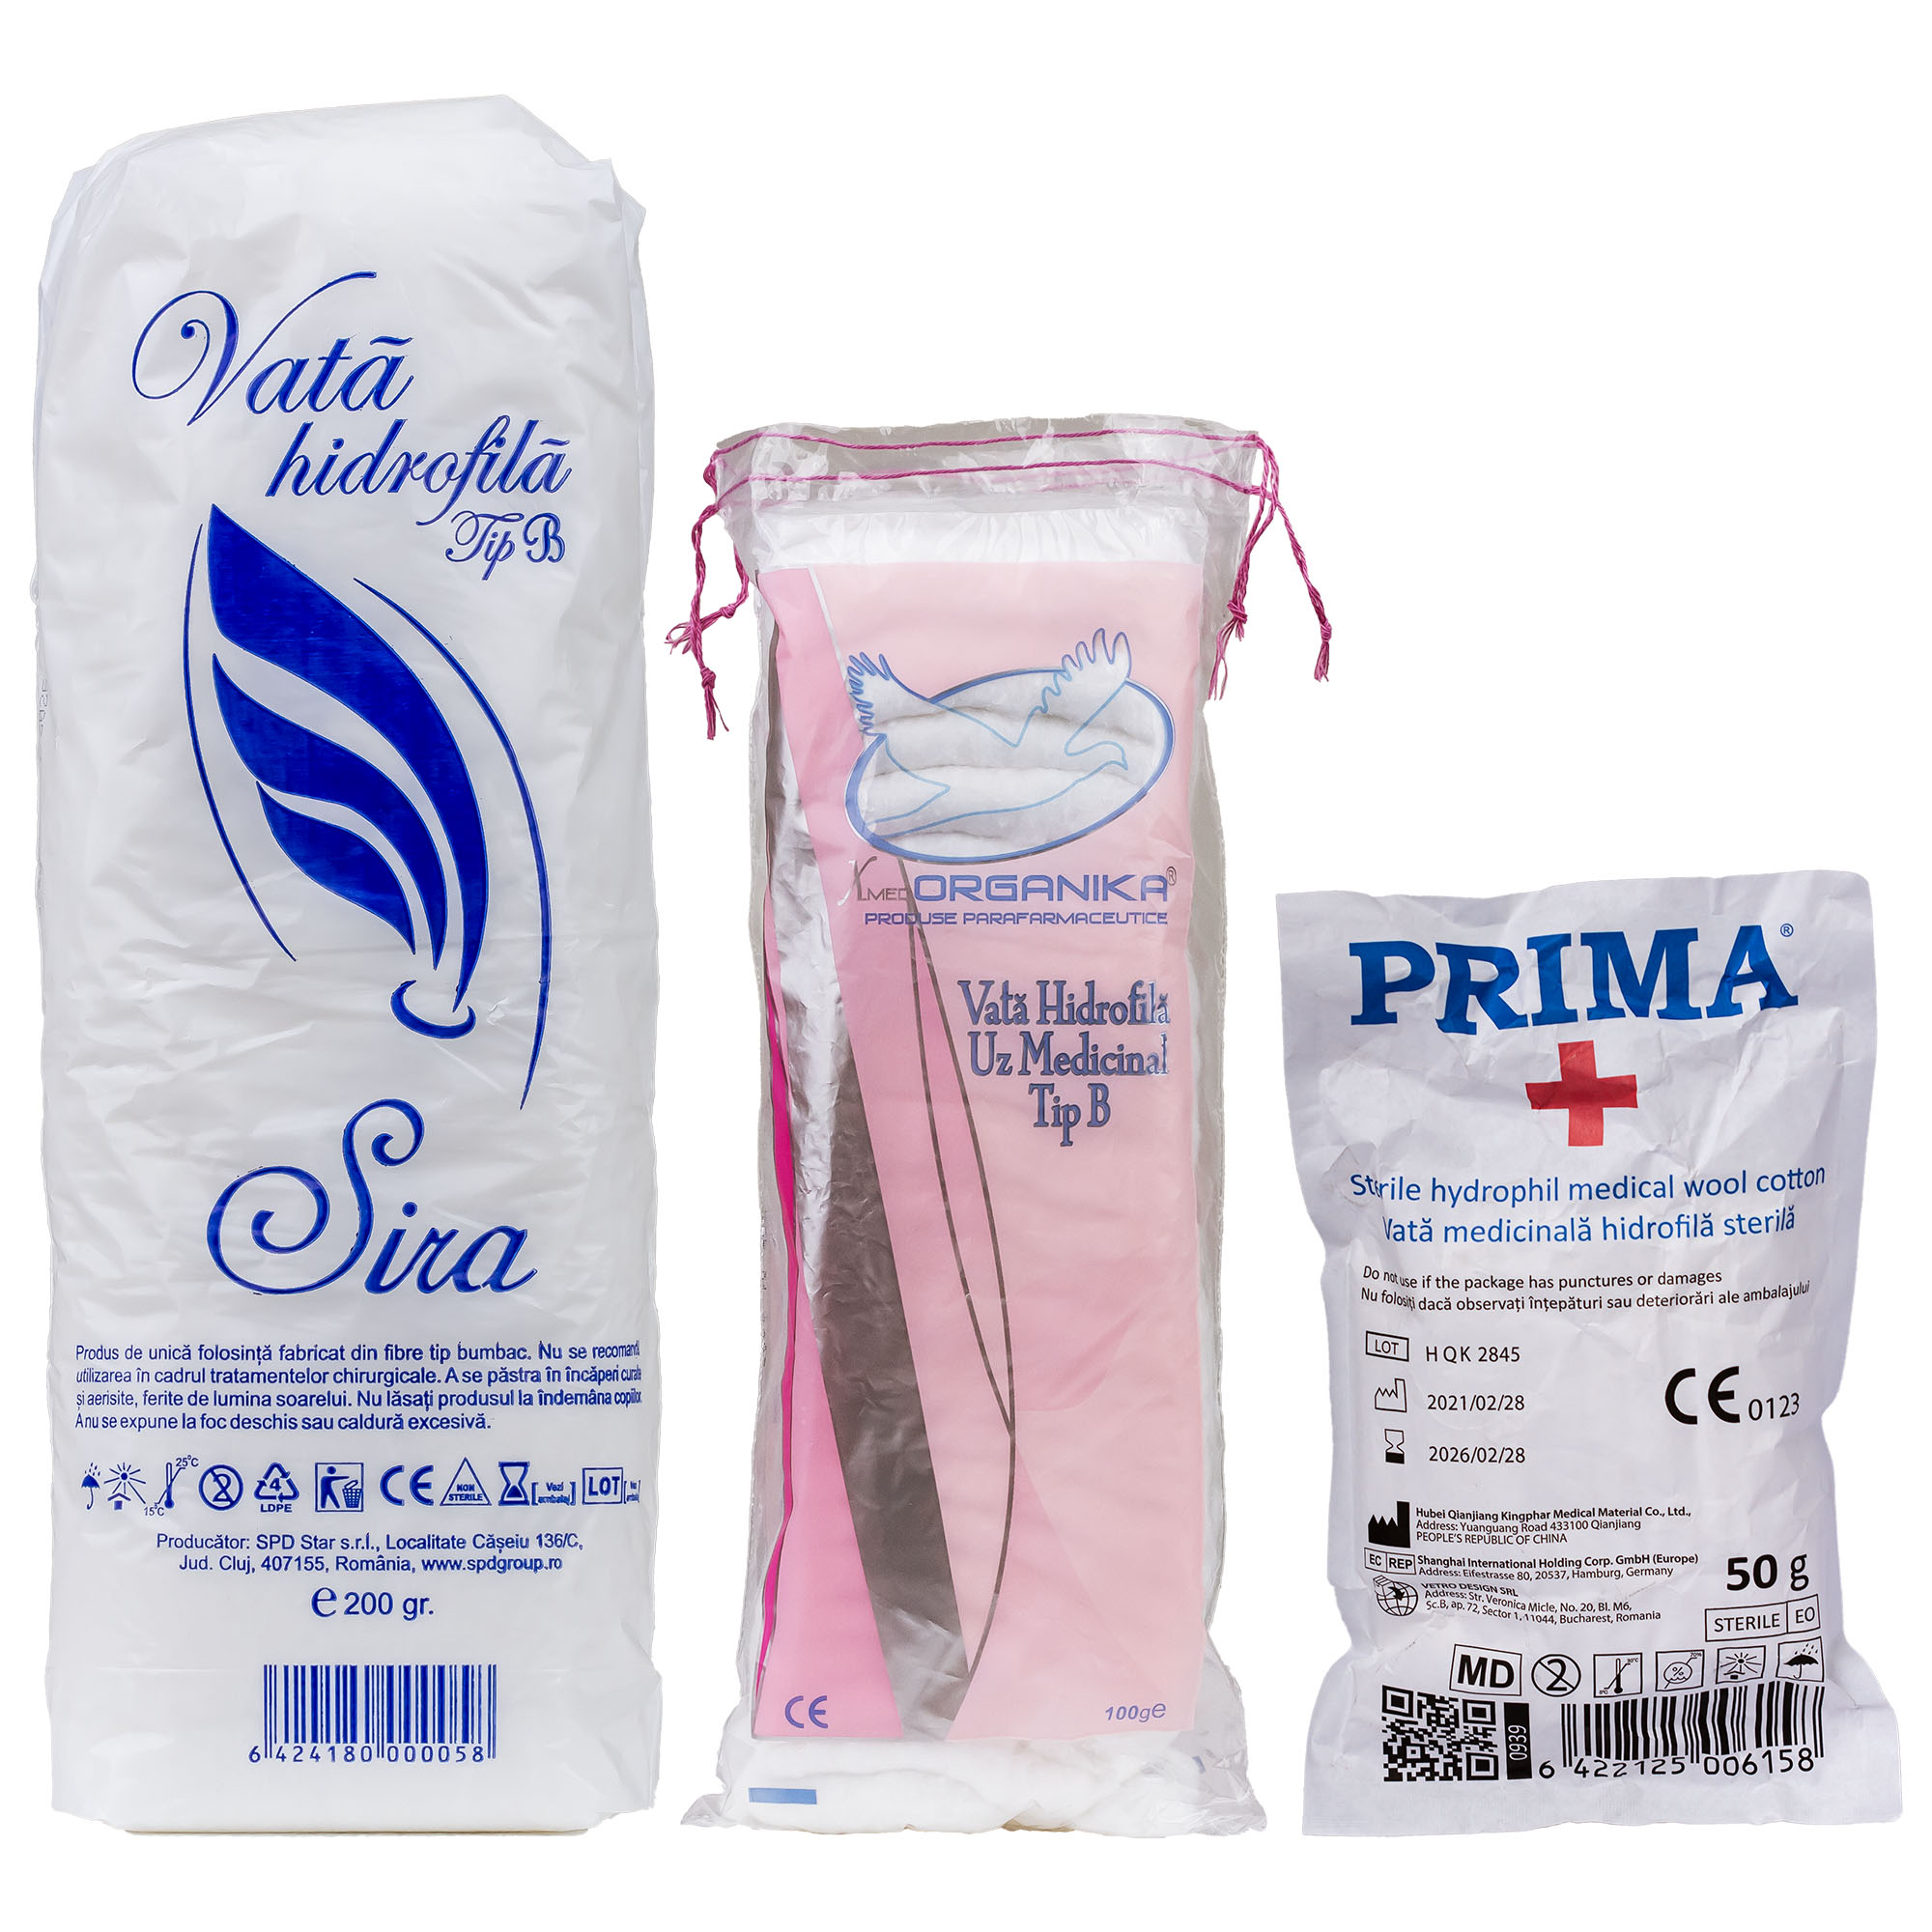 Sterilisation and Disinfectants/RUBBING ALCOHOL AND DISINFECTING SOLUTIONS/Medical Cotton Pleat